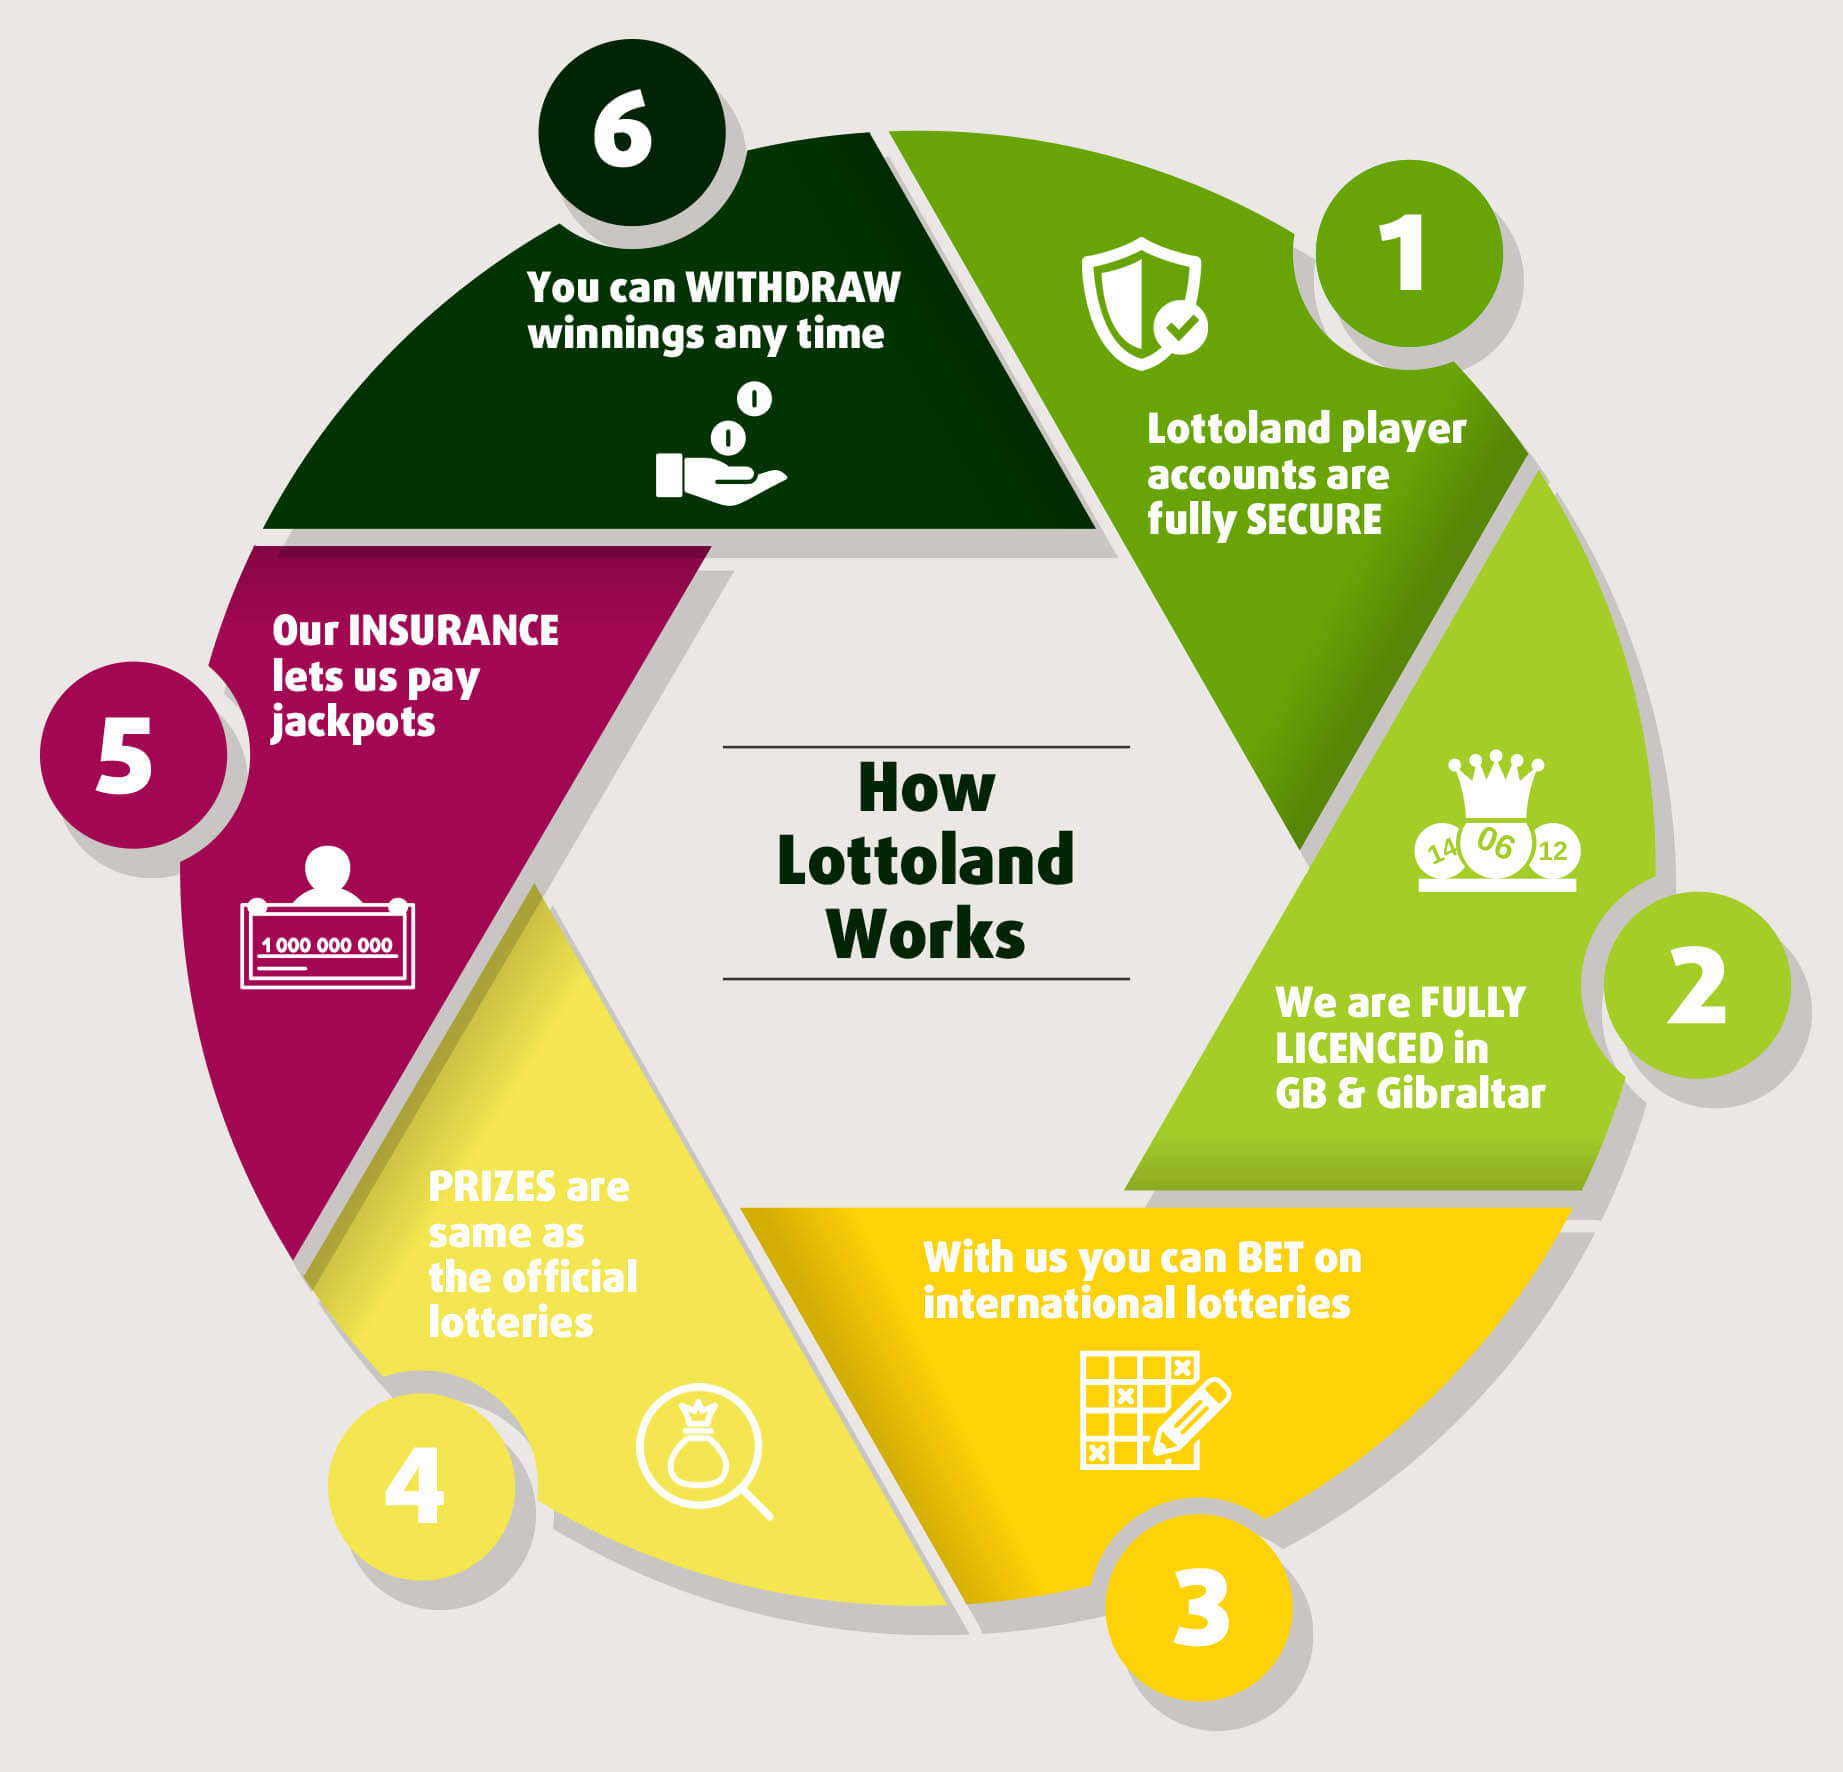 Lottoland business model